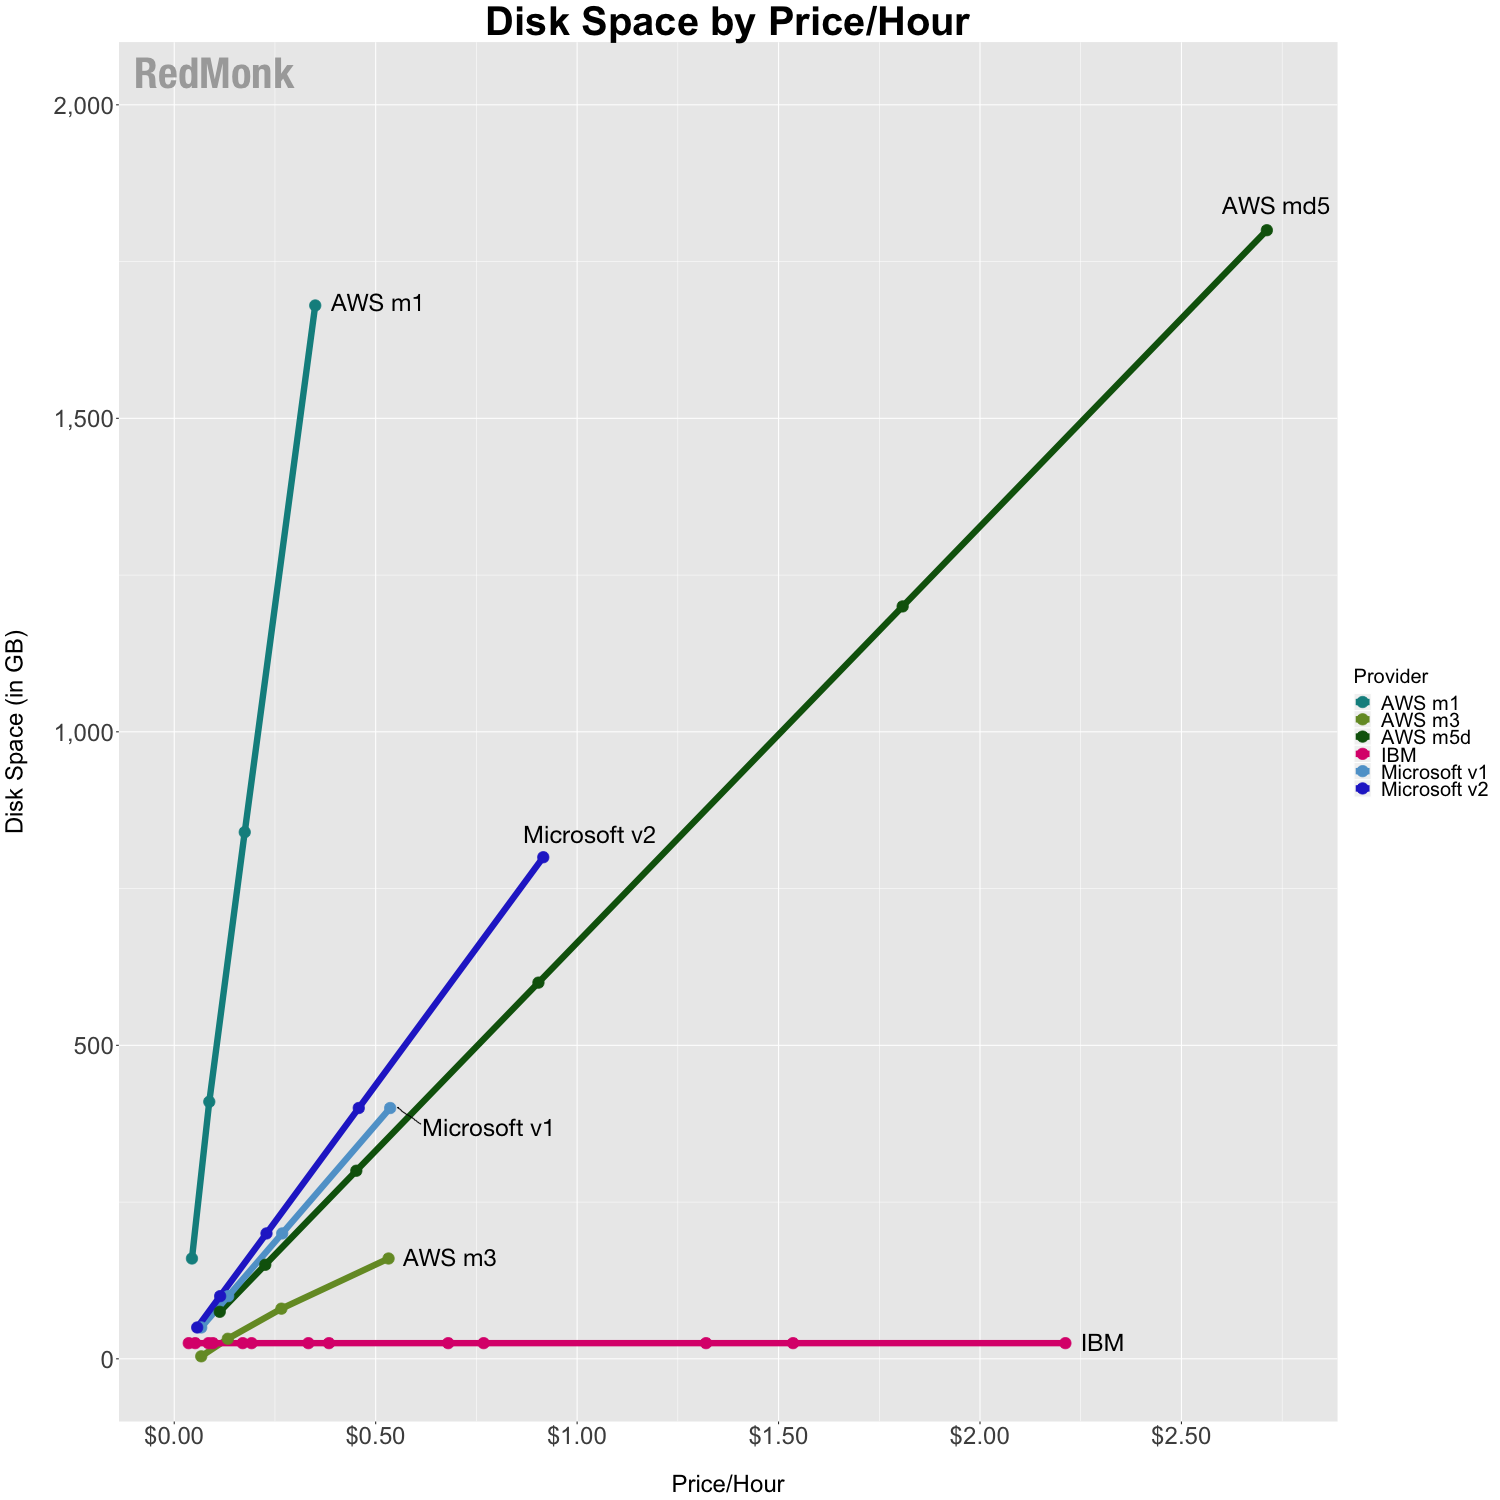 Comparison of IaaS Disk Space Pricing. X-Axis is price/hour, Y-Axis is GB of Disk Space